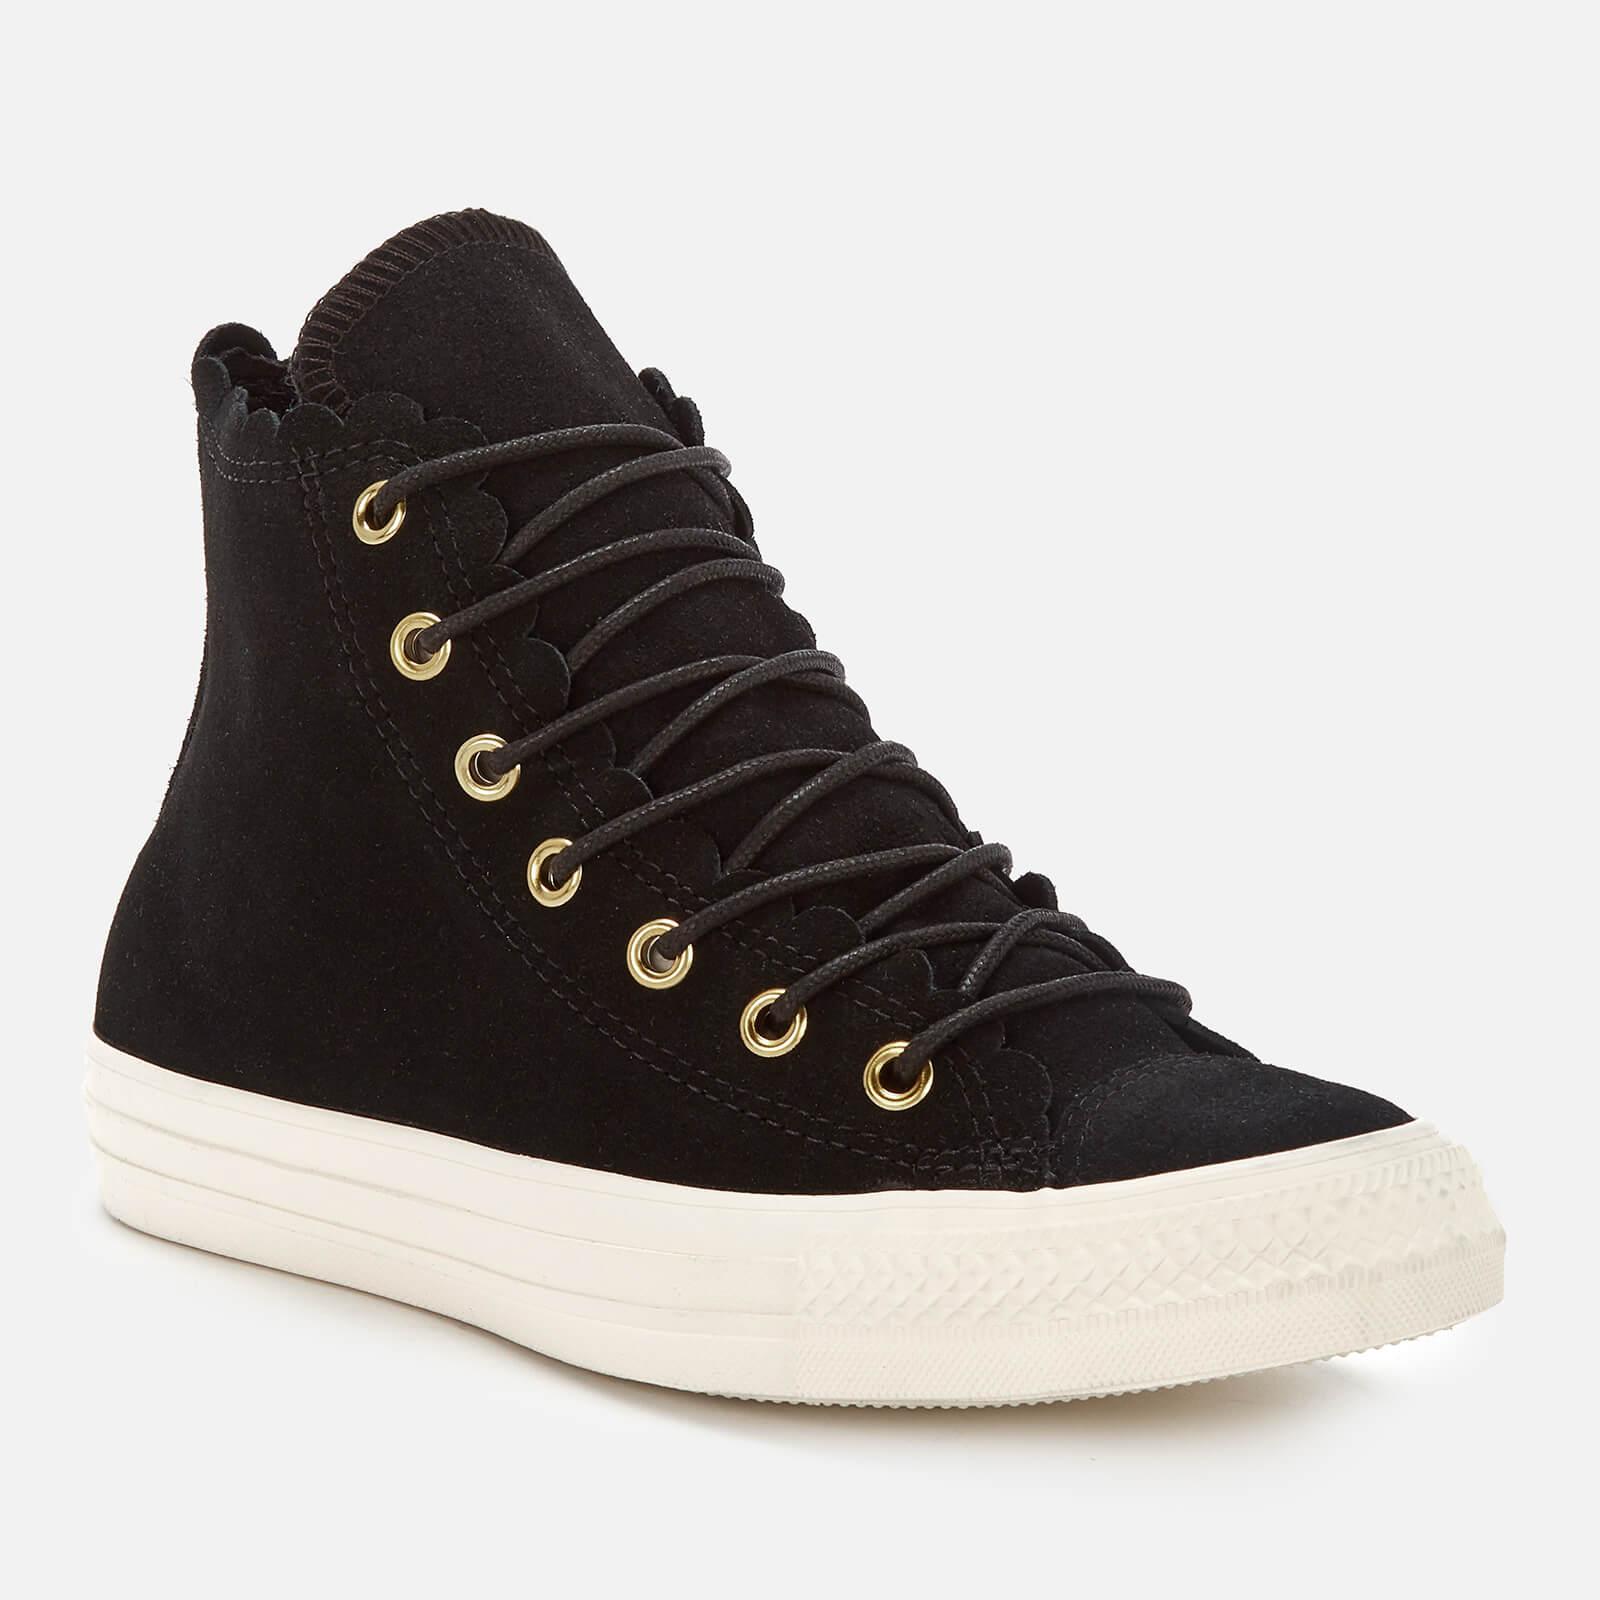 Converse Chuck Taylor All Star Scalloped Edge Hi-top Trainers in Black -  Lyst